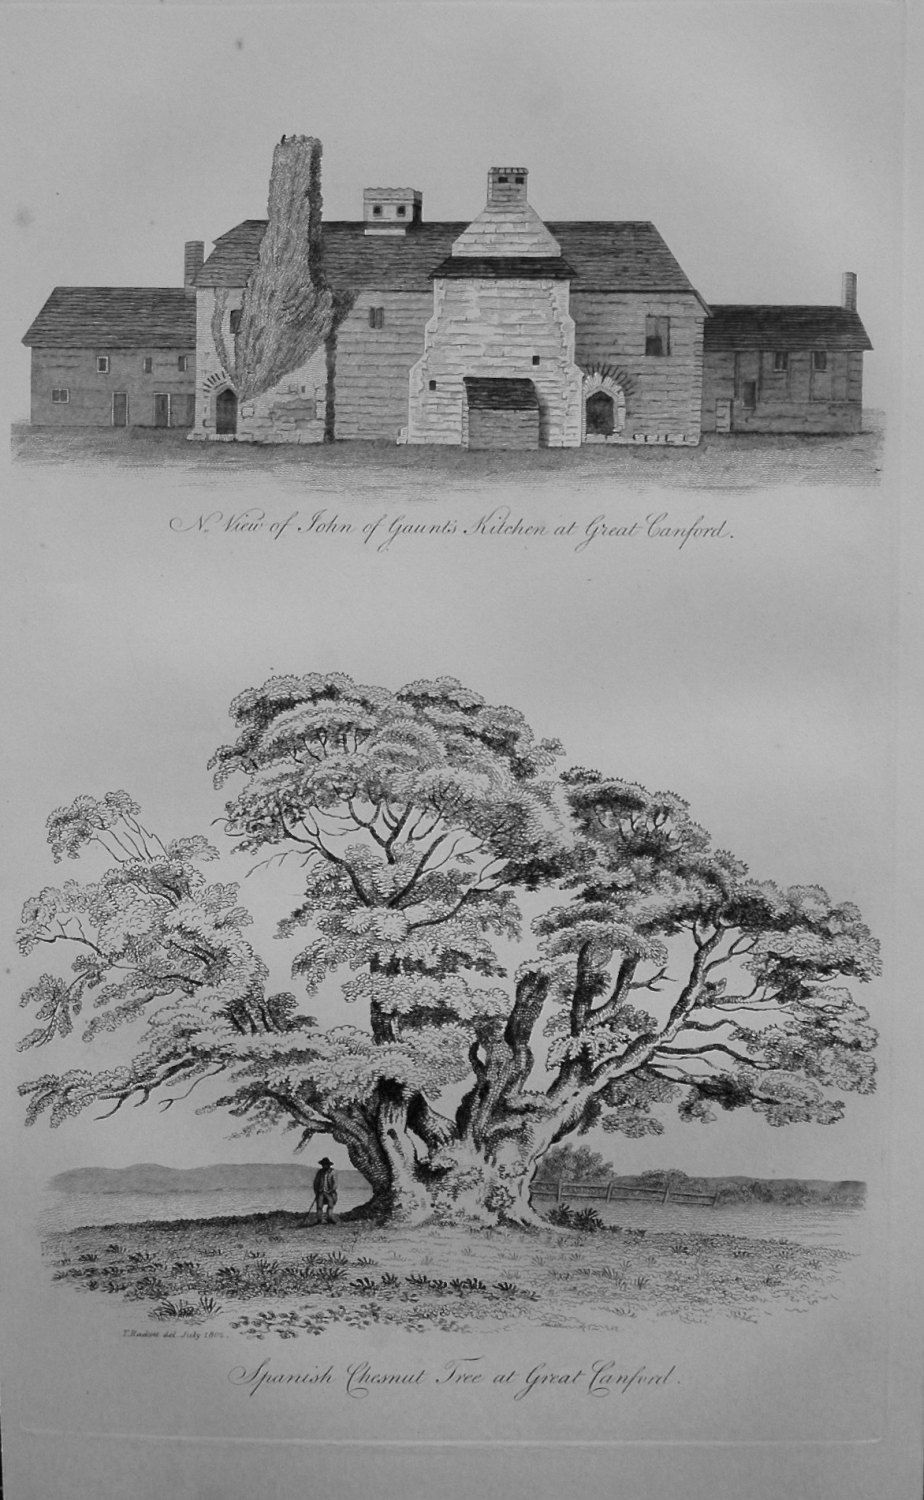 Spanish Chestnut Tree at Great Canford, and North view of John of Gaunts Ki